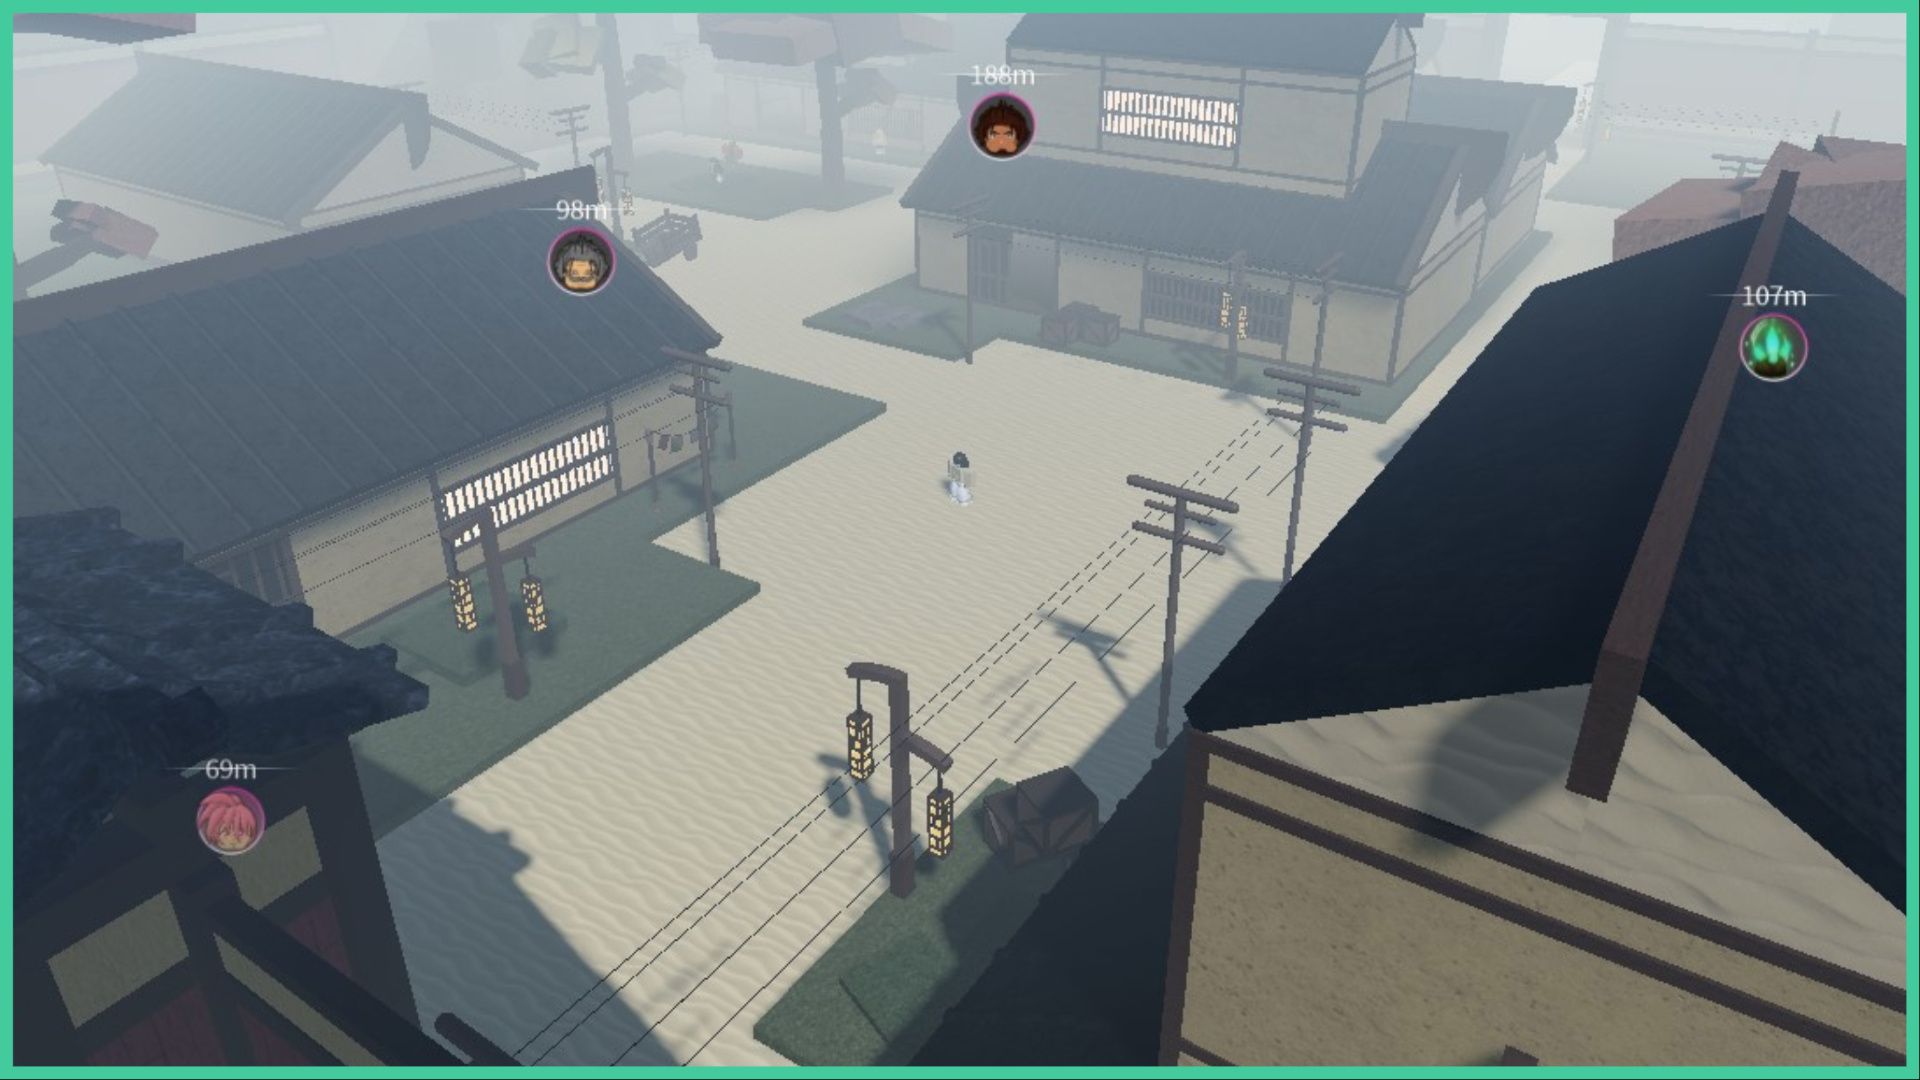 feature image for our project slayers breathing tier list, the image features a screenshot from a hub area of the game, which looks like a taisho period village, with traditional style buildings and streetlamps, the entire area is covered in mist